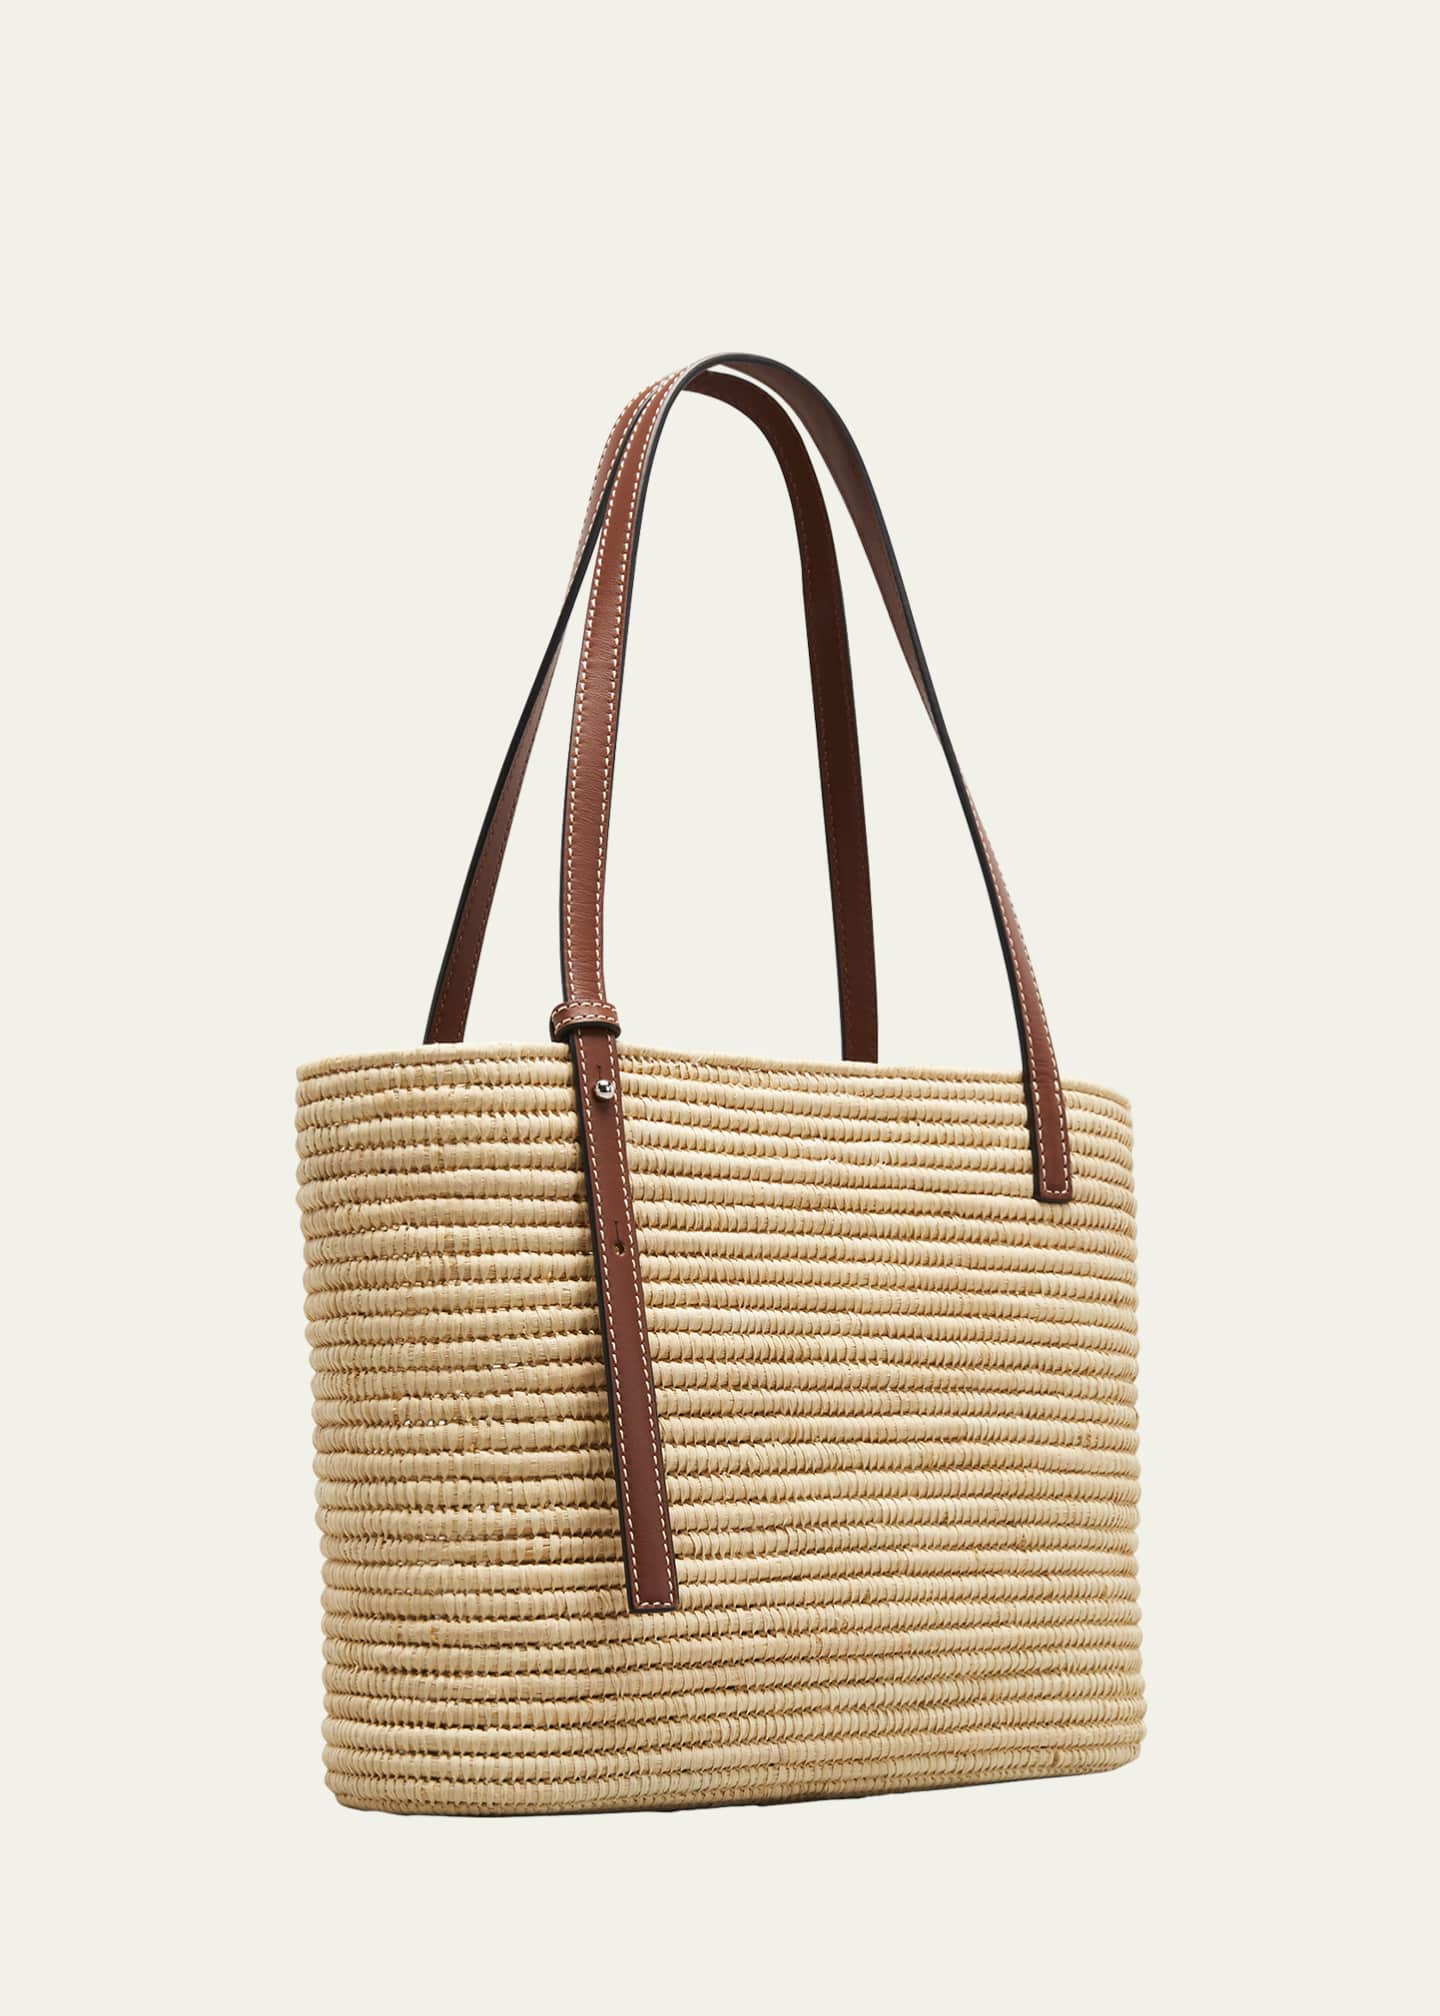 Loewe x Paula's Ibiza Square Basket Small Bag in Raffia with Leather Handles Image 3 of 5